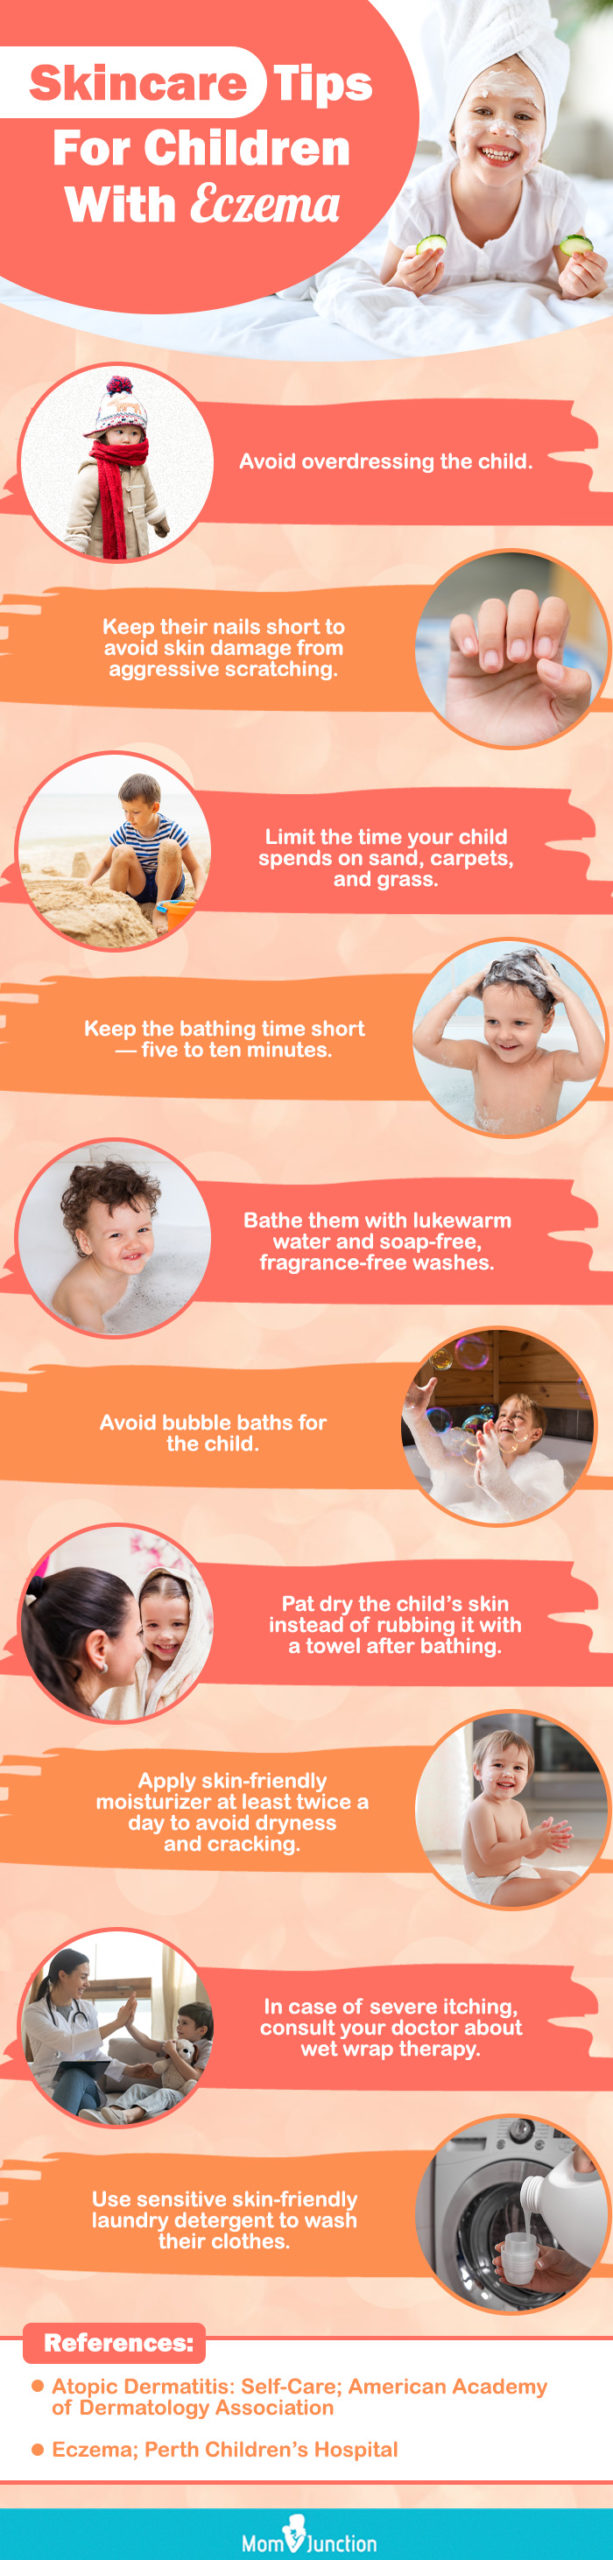 Skincare Tips For Children With Eczema